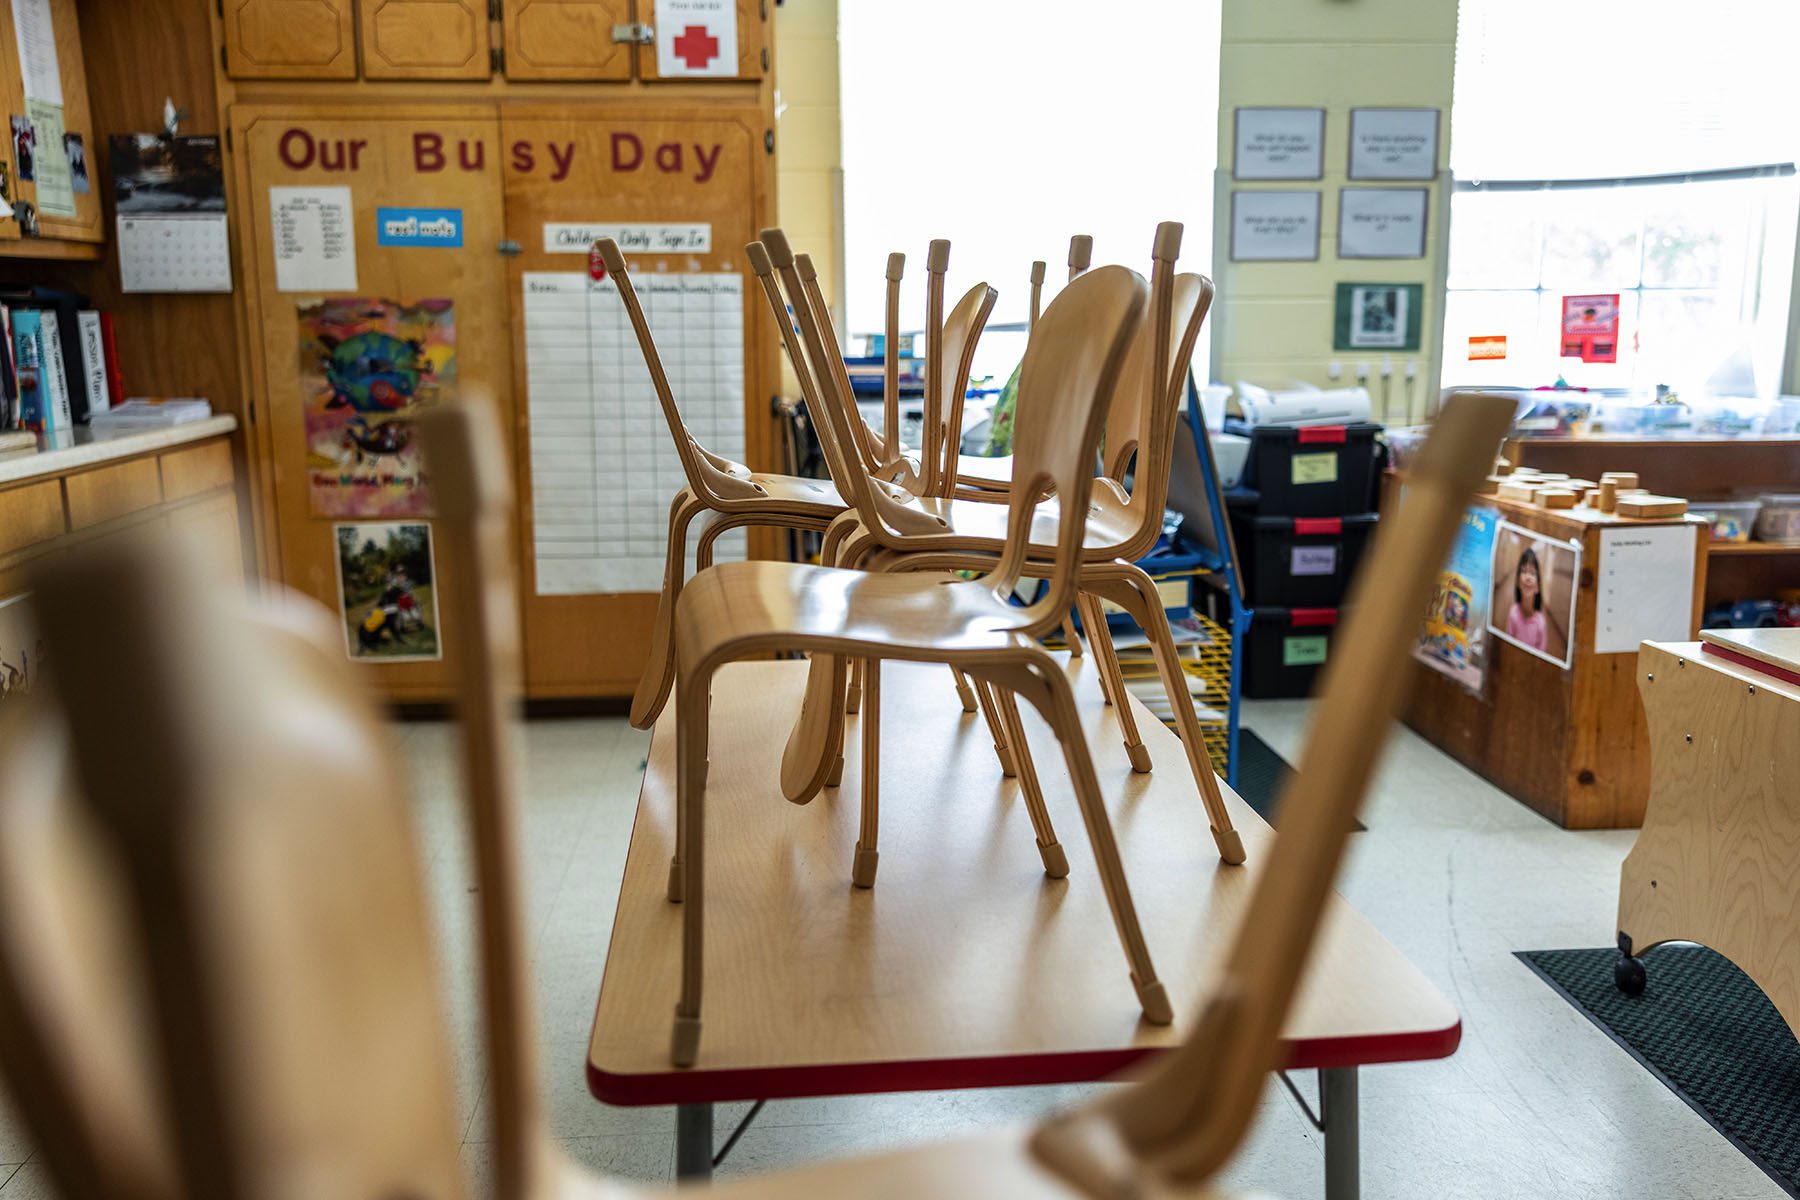 Wooden chairs are stacked on top of tables inside a classroom at the Chambliss Center for Children.